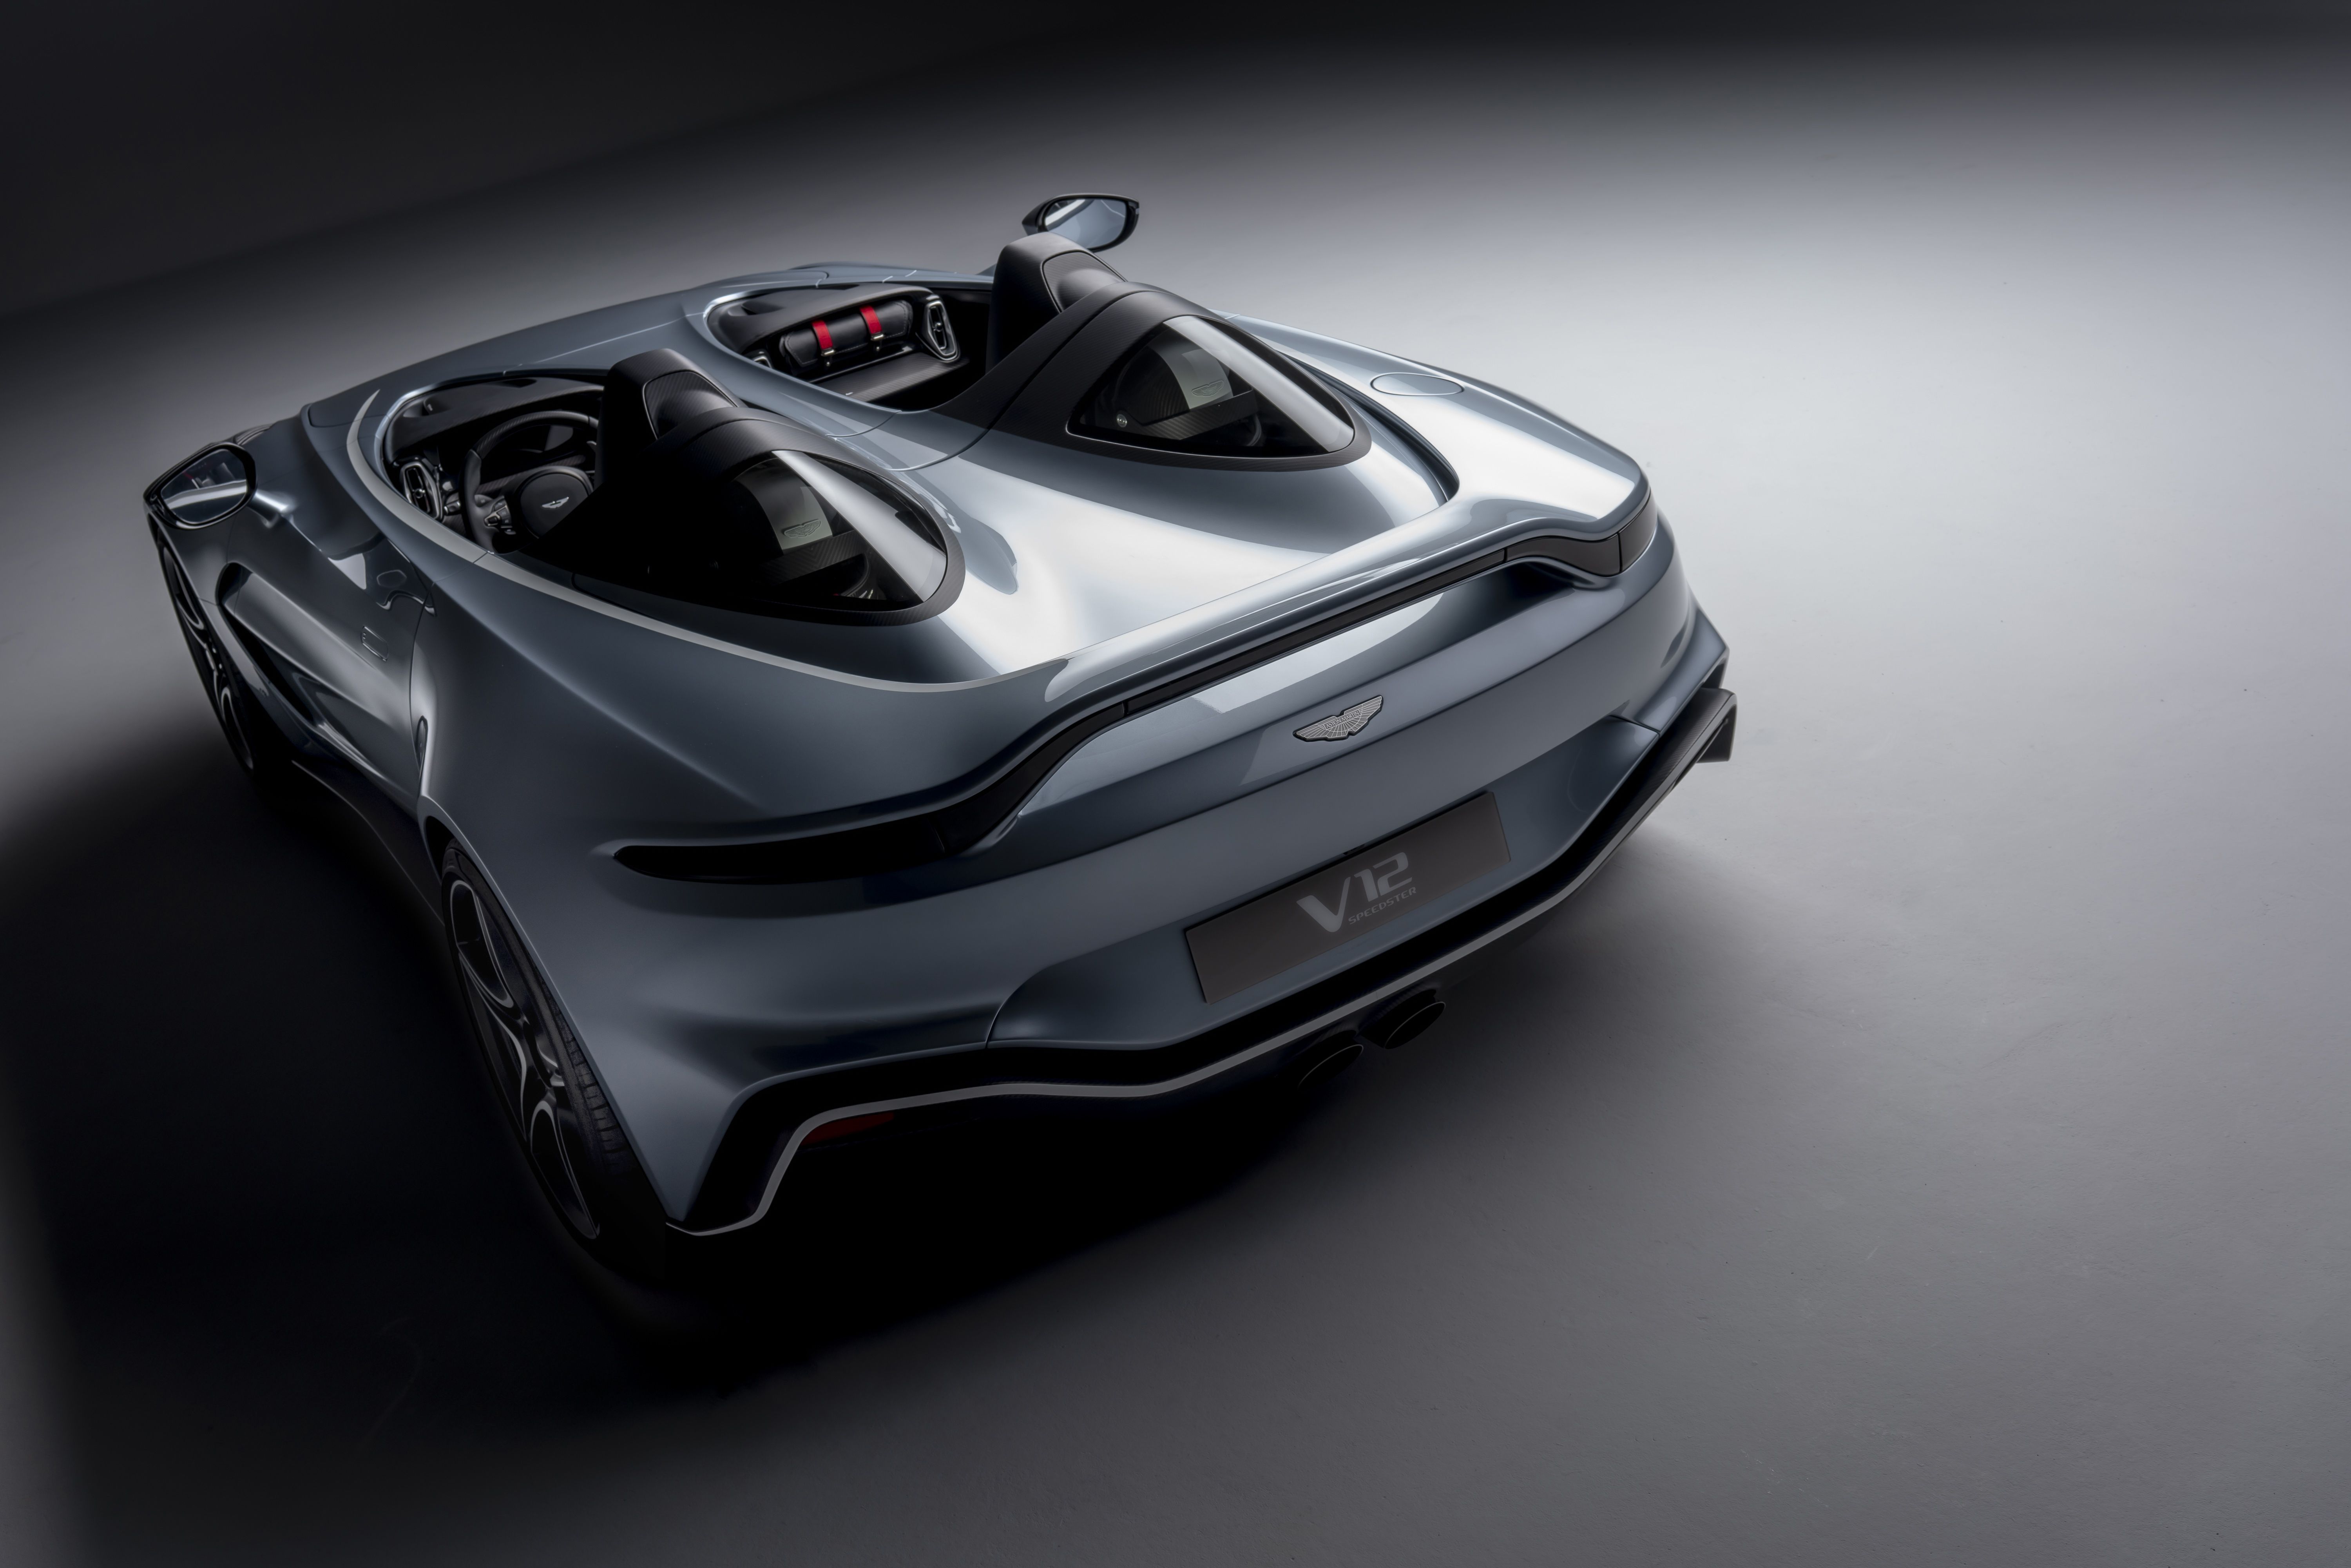 2020 3 Reasons Why the Aston MArtin V12 Speedster is Ridiculous